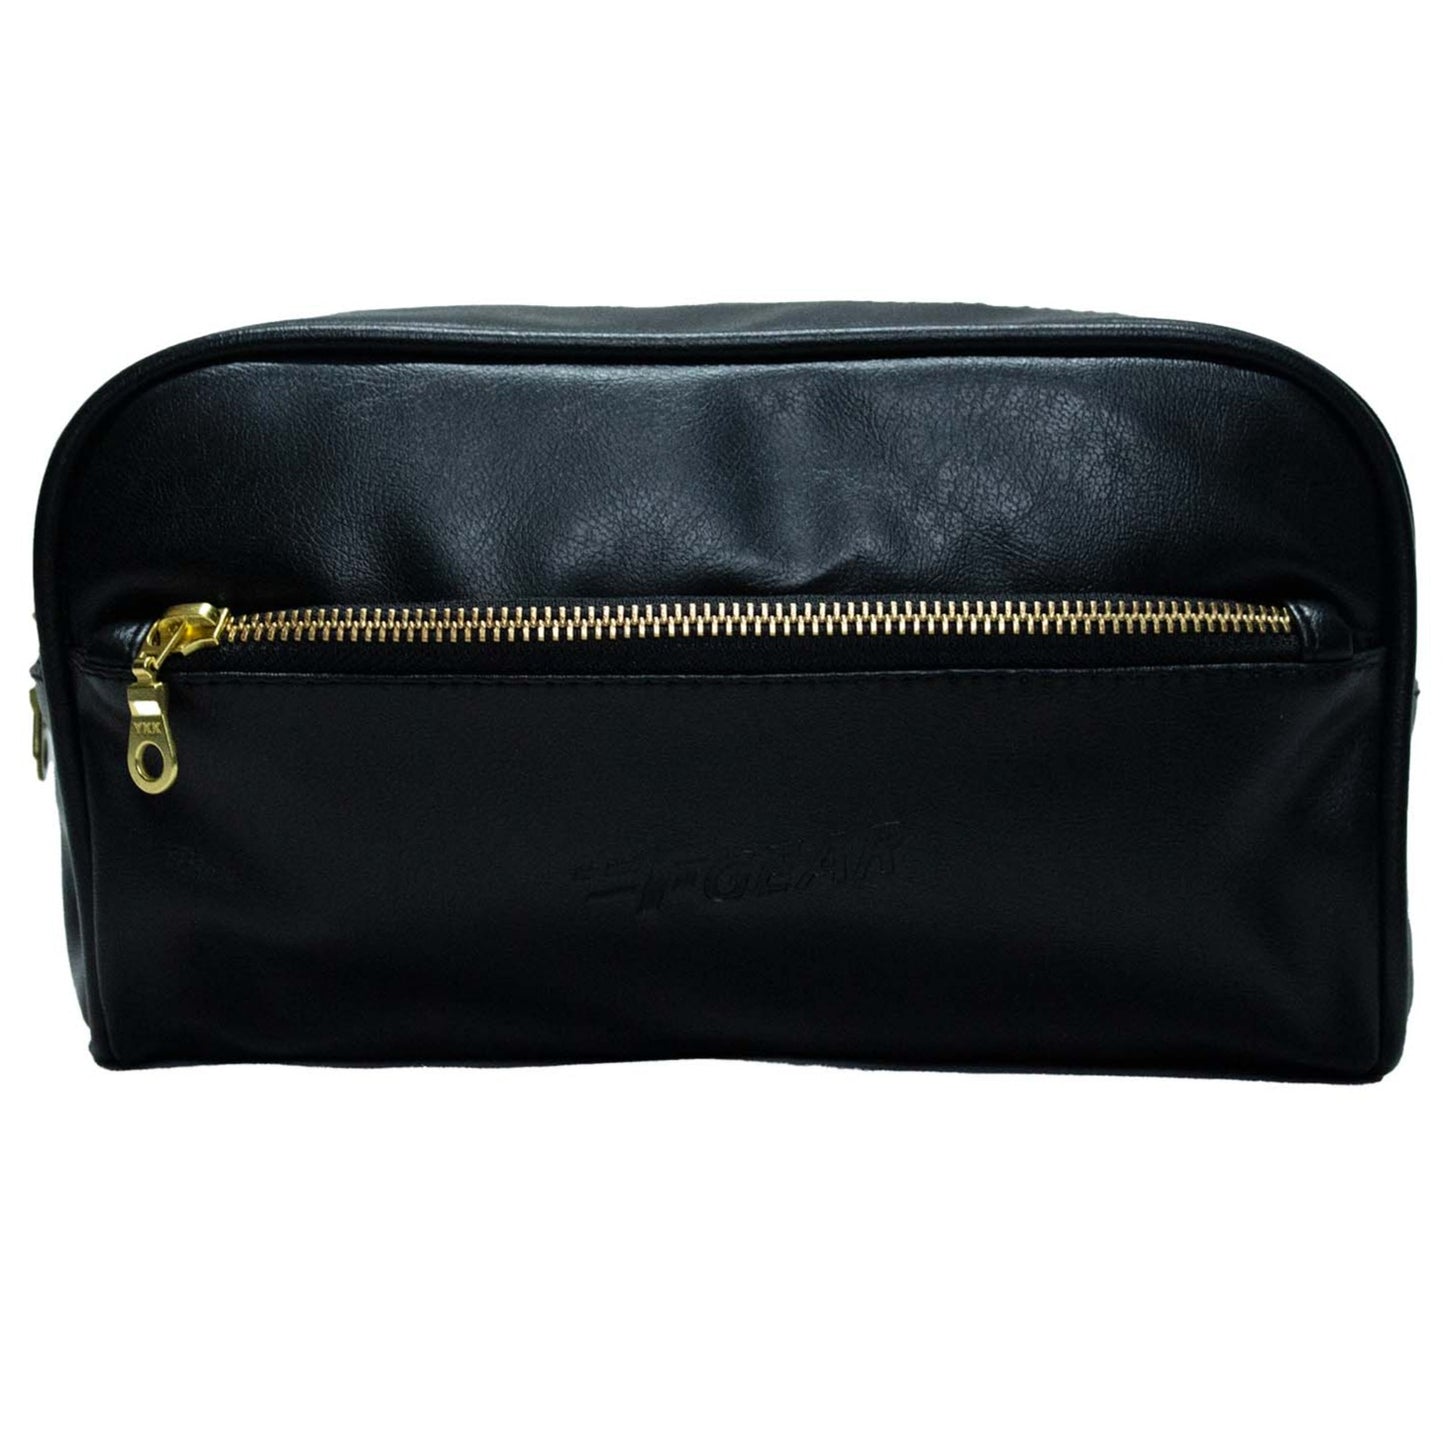 Groove Black Pouch